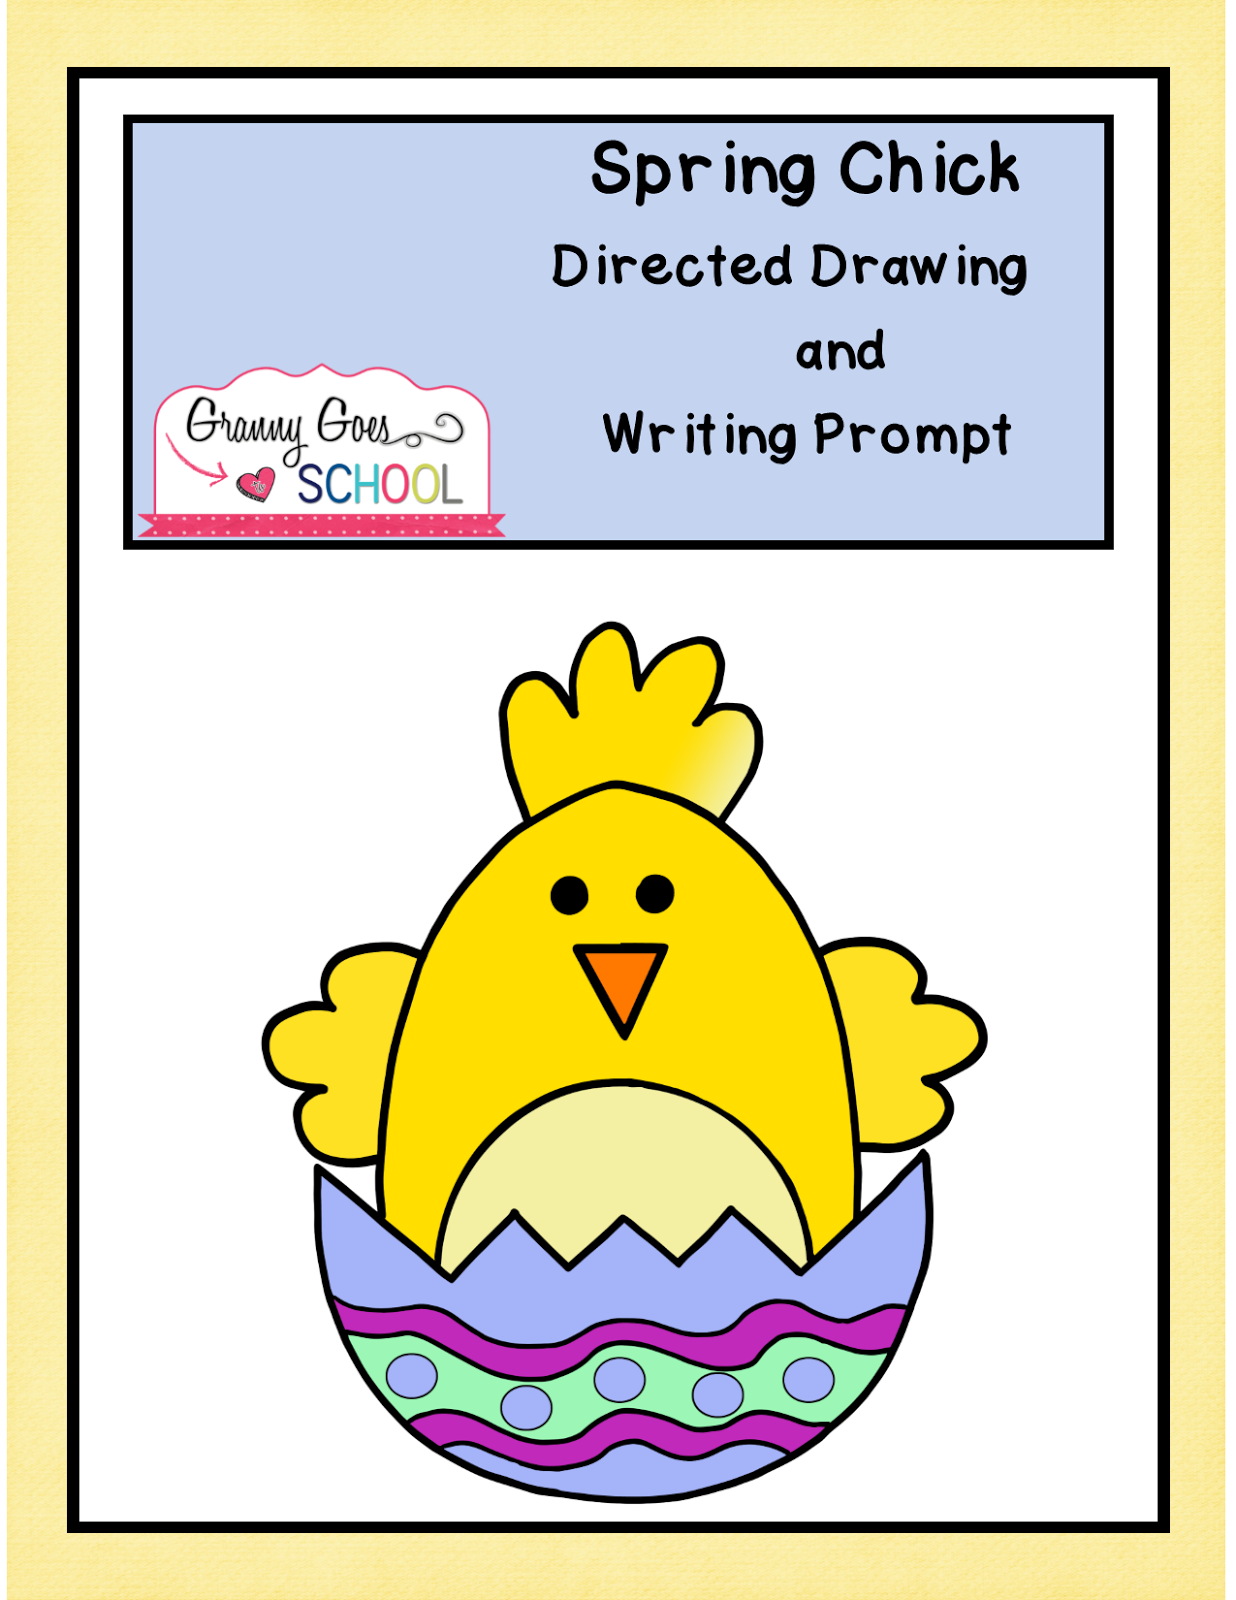 https://www.teacherspayteachers.com/Product/Spring-Chick-Directed-Drawing-and-Writing-Prompt-Freebie-1793228